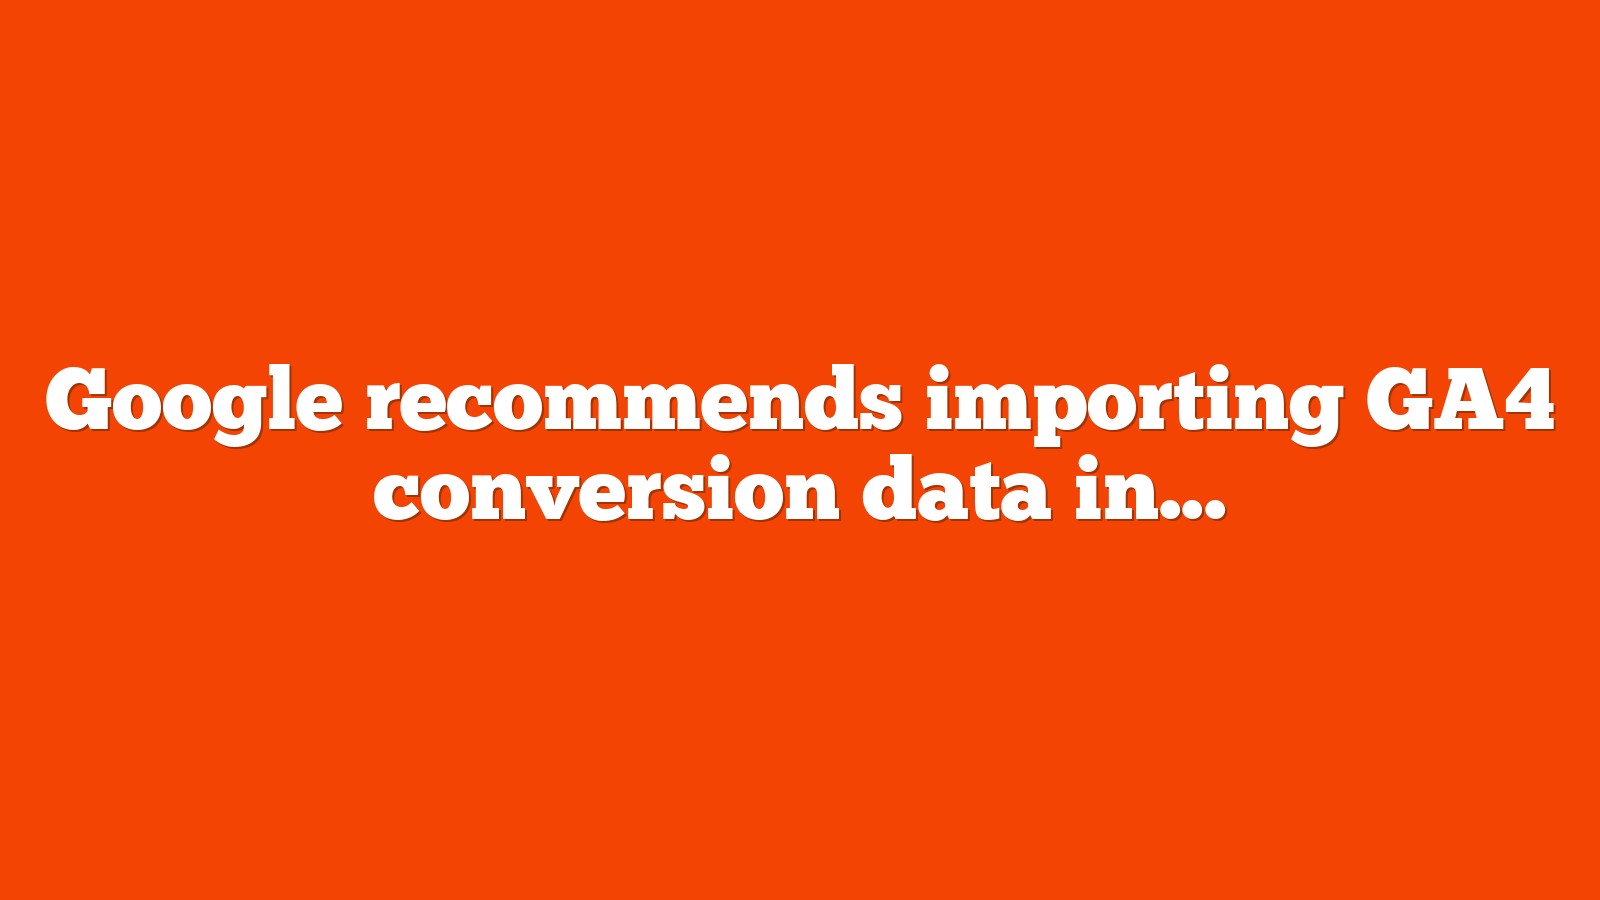 Google recommends importing GA4 conversion data into Google Ads